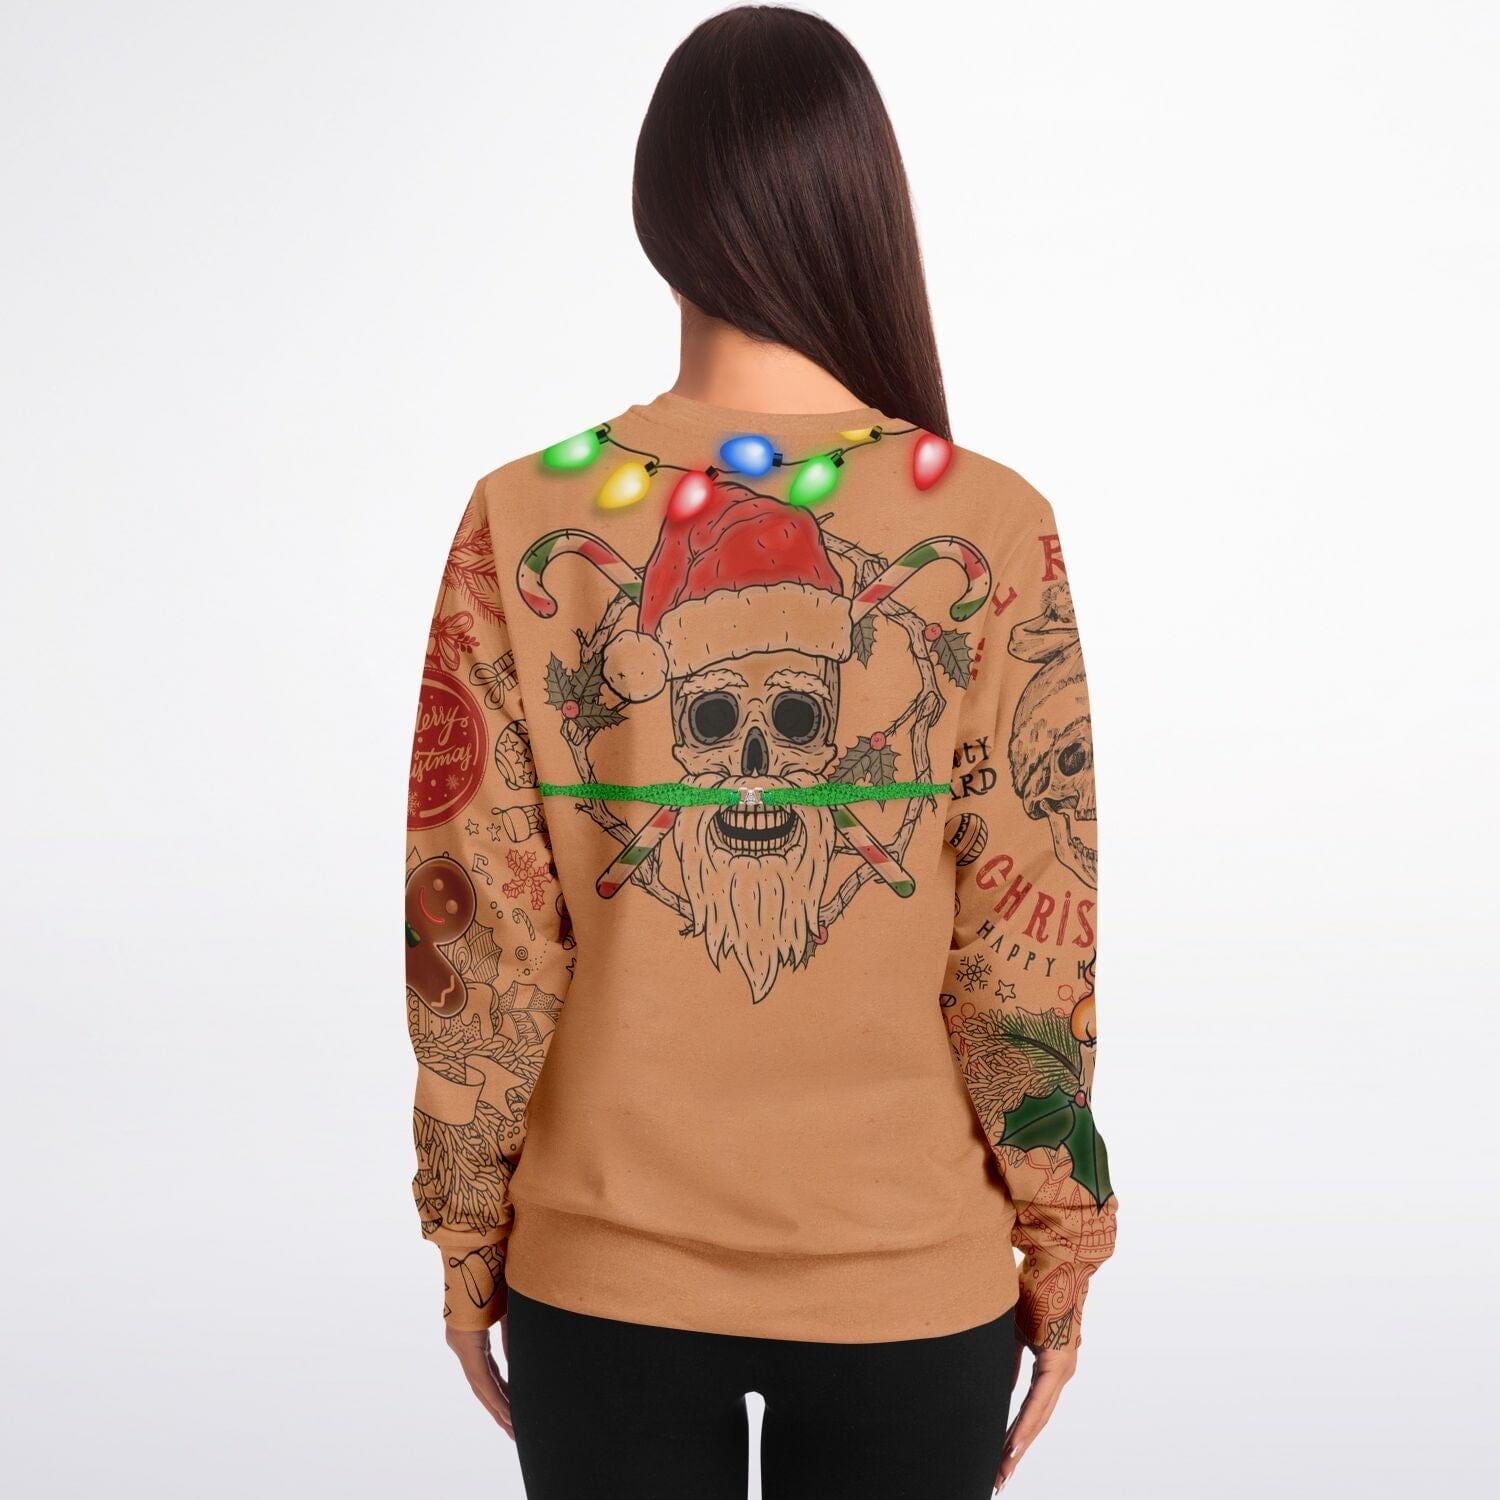 Beach Body Xmas Life Front and Rear Ugly Christmas Sweater